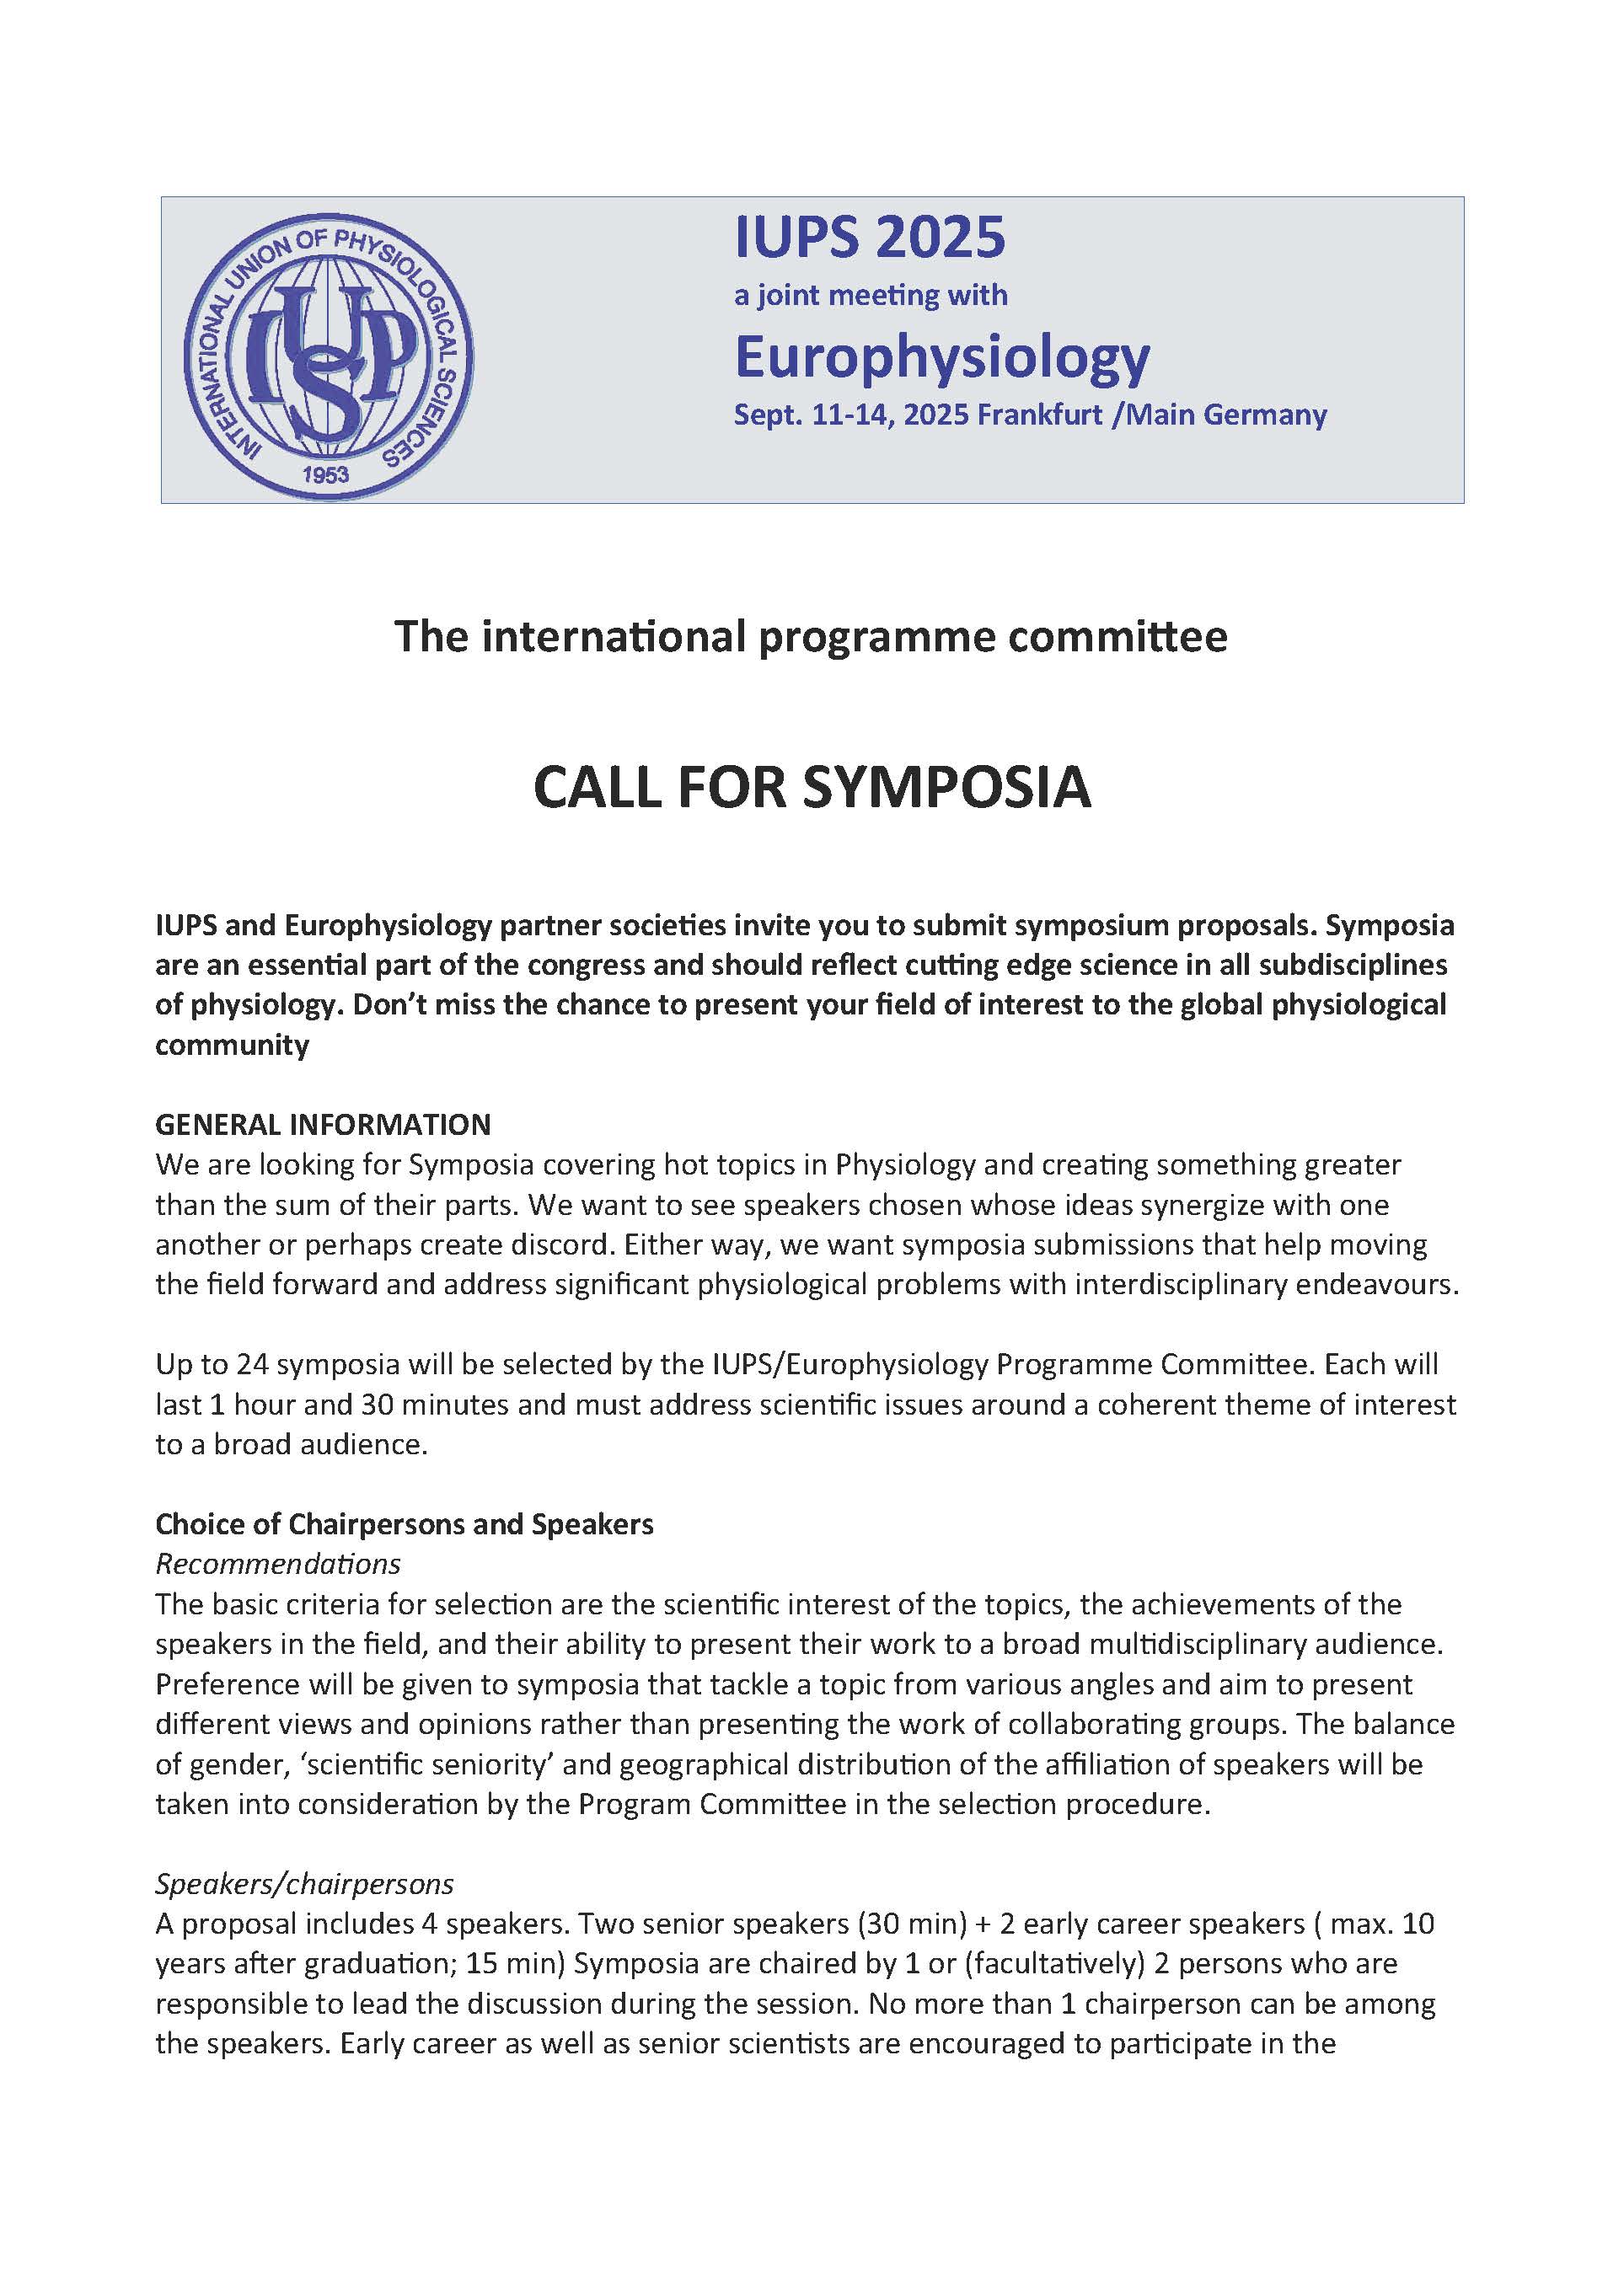 page 1 of call for symposia